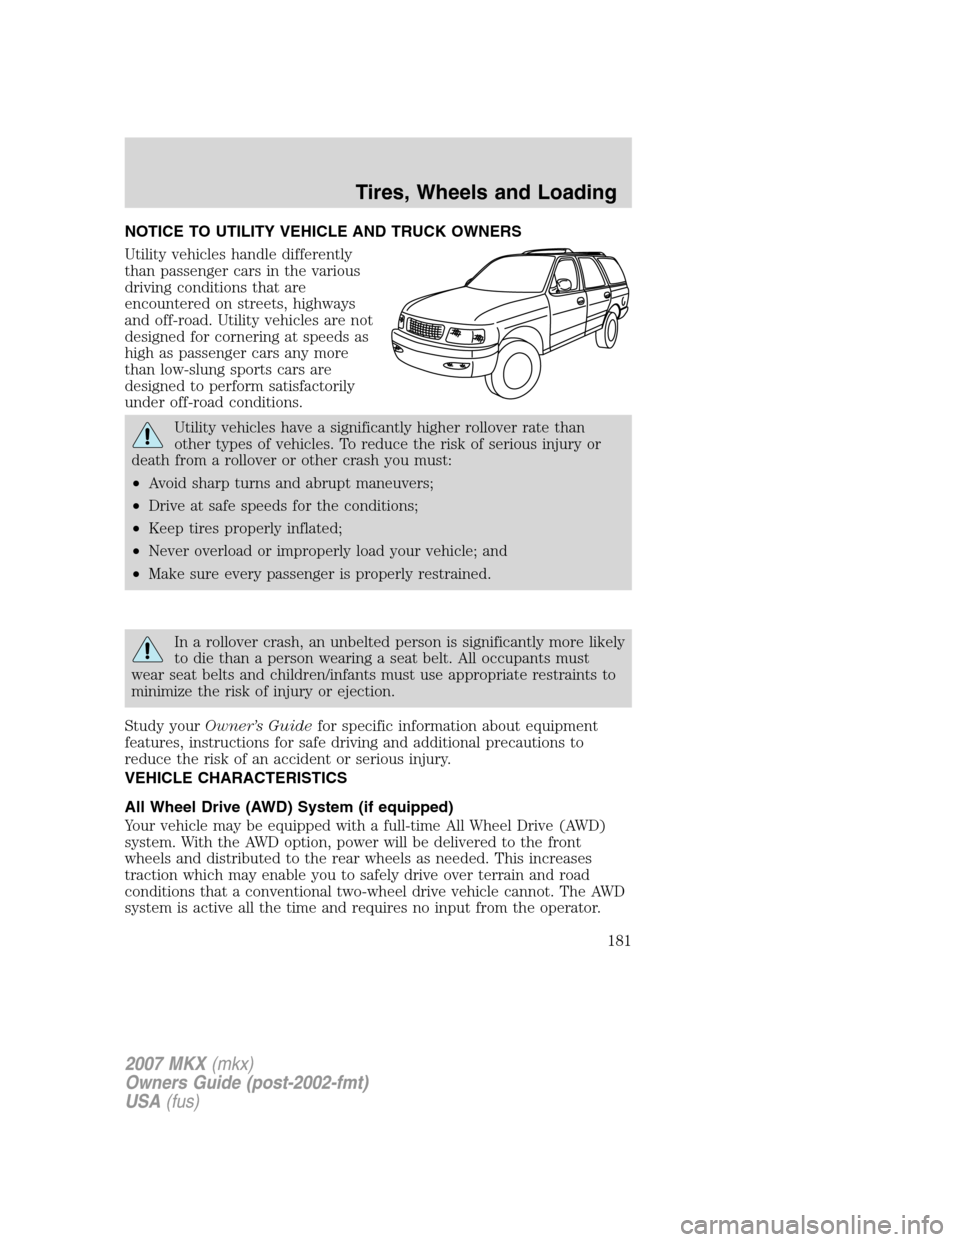 LINCOLN MKX 2007  Owners Manual NOTICE TO UTILITY VEHICLE AND TRUCK OWNERS
Utility vehicles handle differently
than passenger cars in the various
driving conditions that are
encountered on streets, highways
and off-road. Utility veh